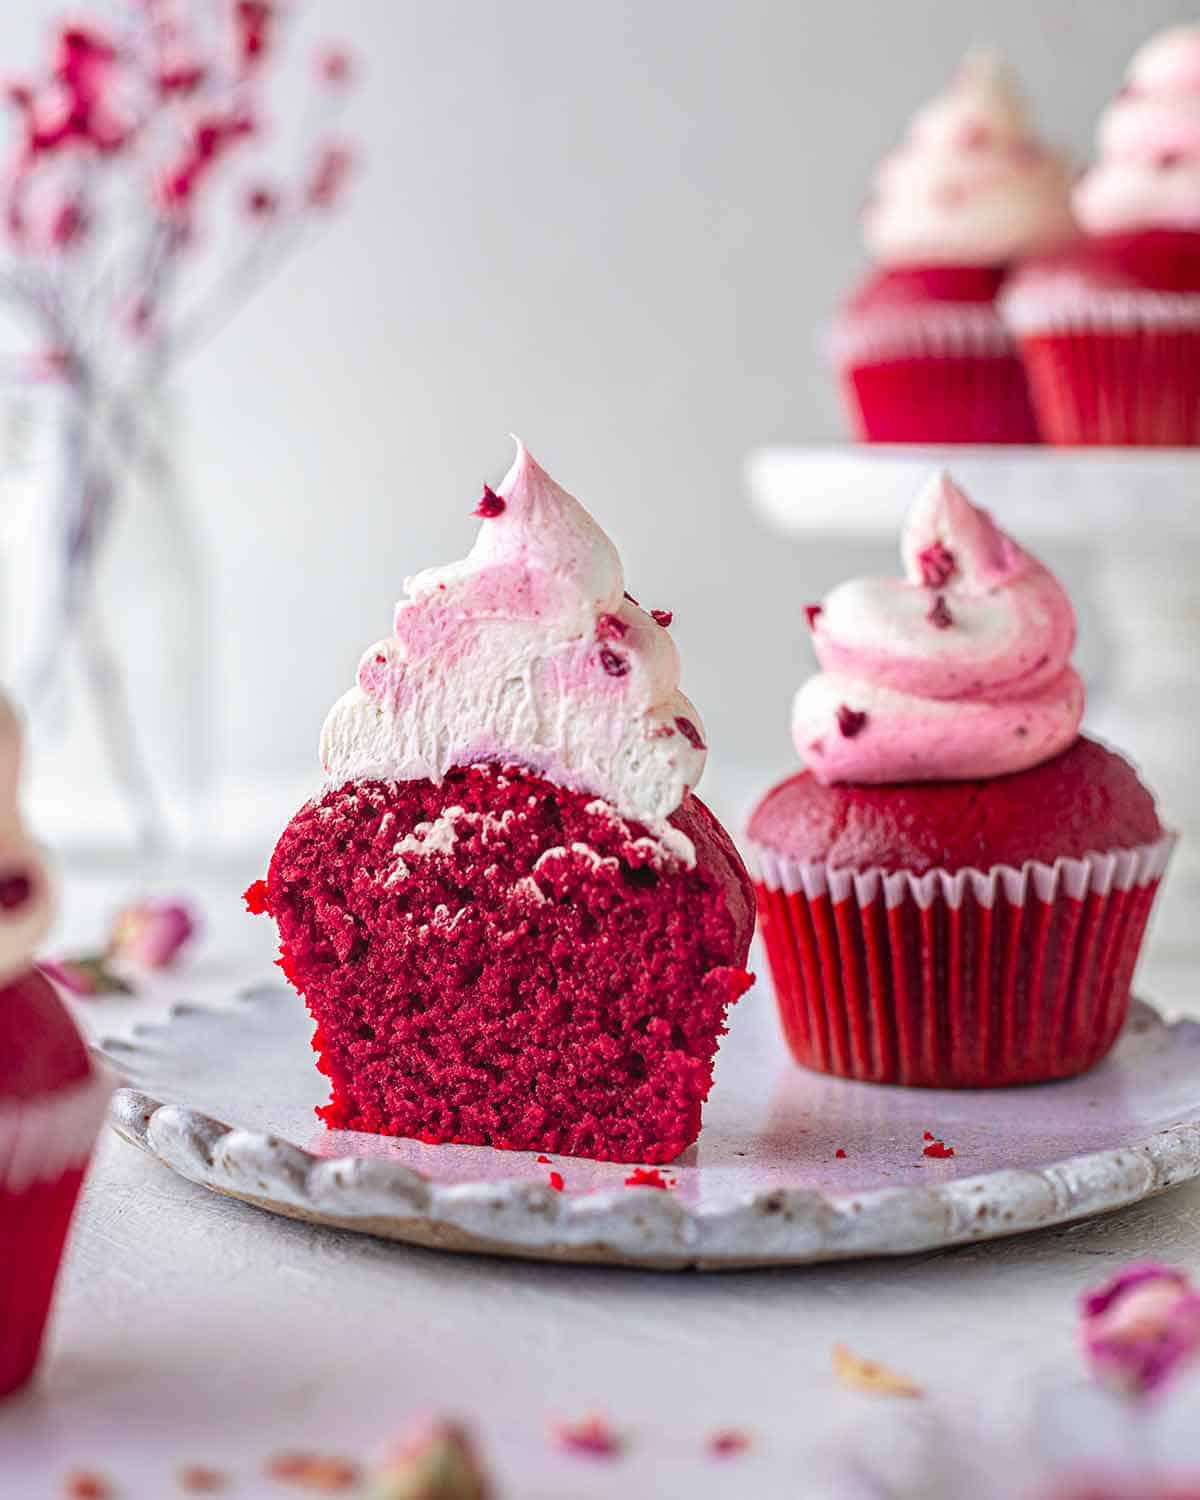 Vegan red velvet cupcakes with frosting